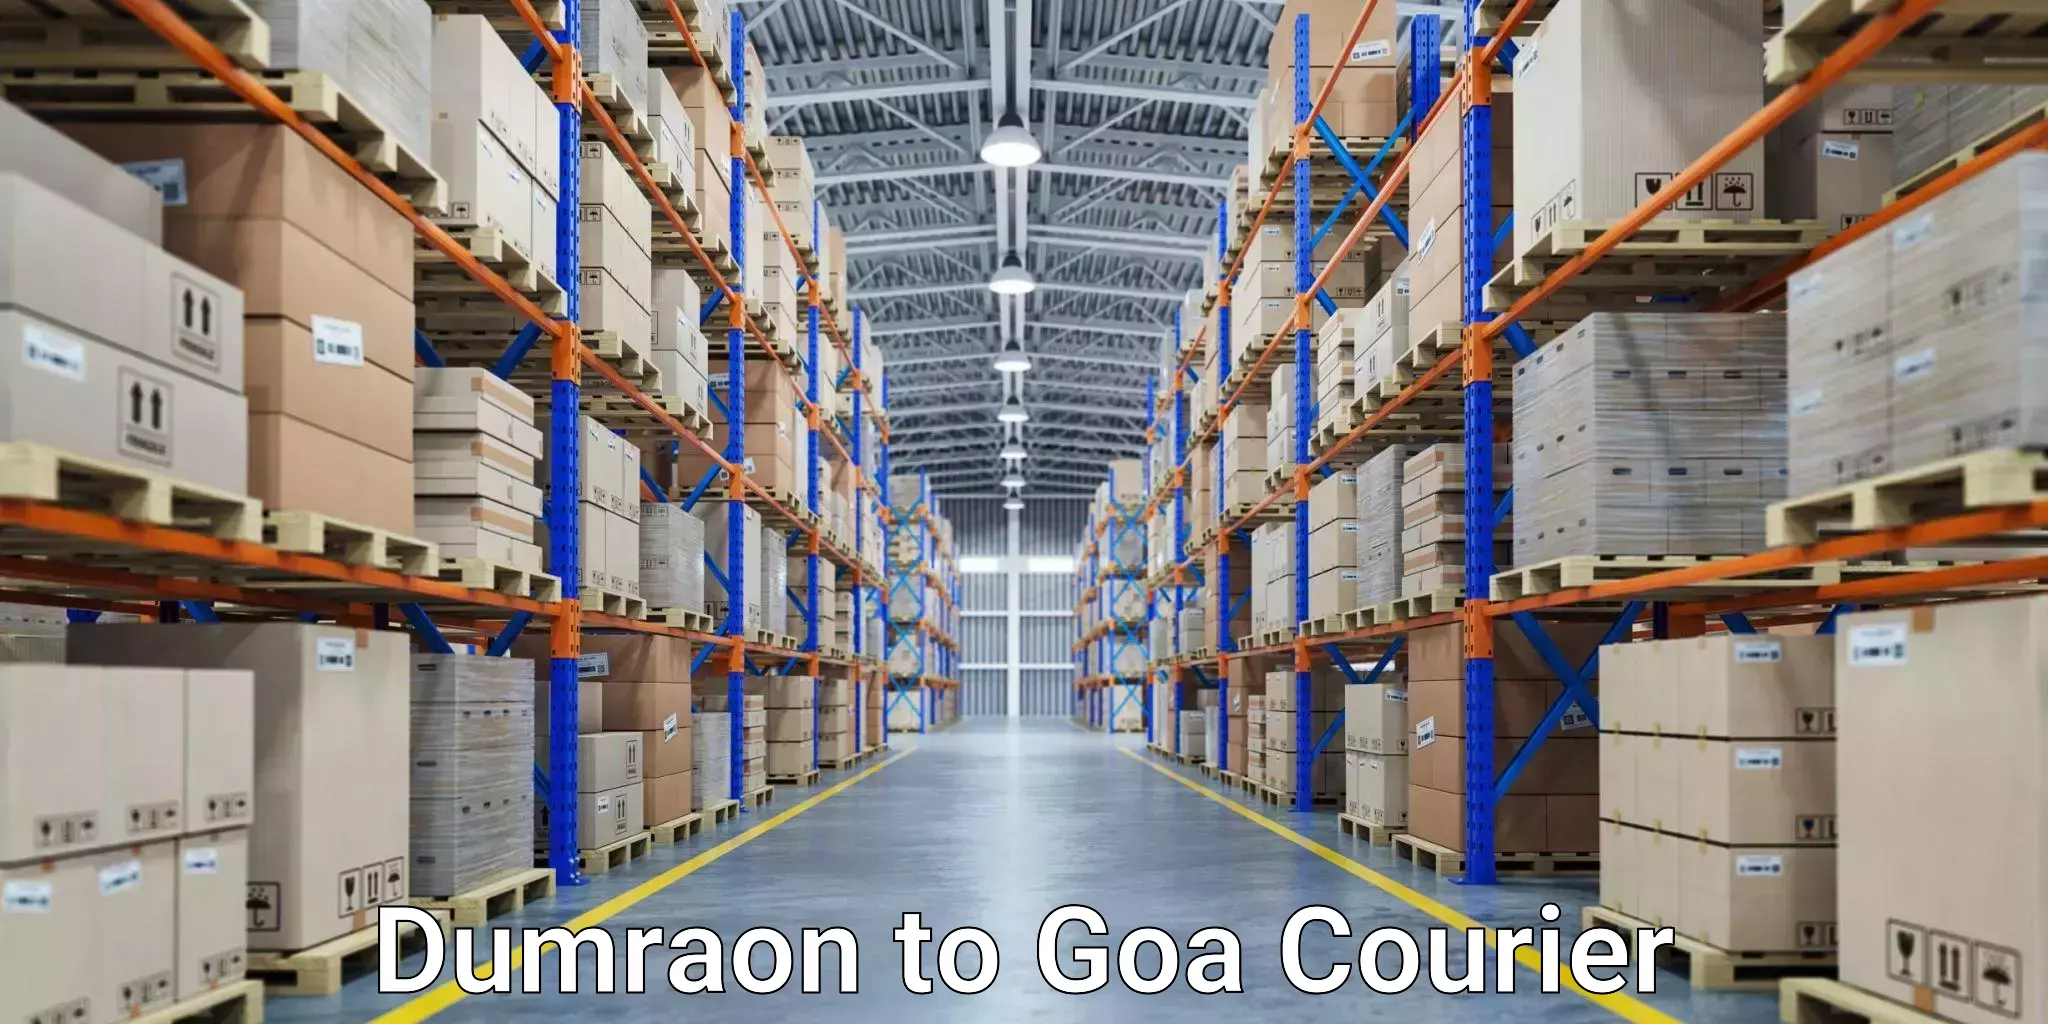 Express delivery network Dumraon to Goa